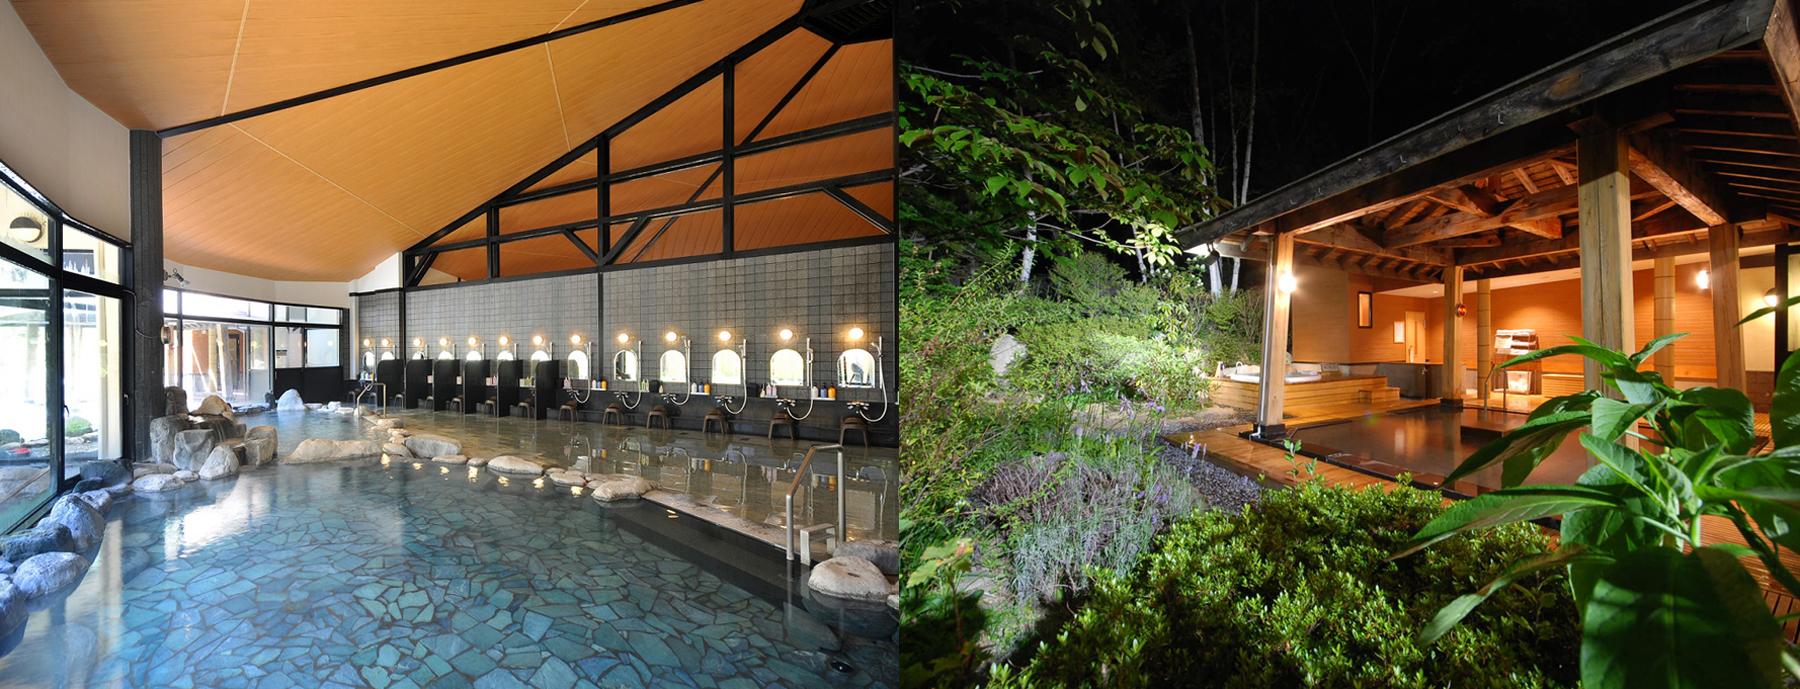 Two different outdoor baths on offer to suit varying tastesThe largest hot spring in the Omachi Hot Spring Town